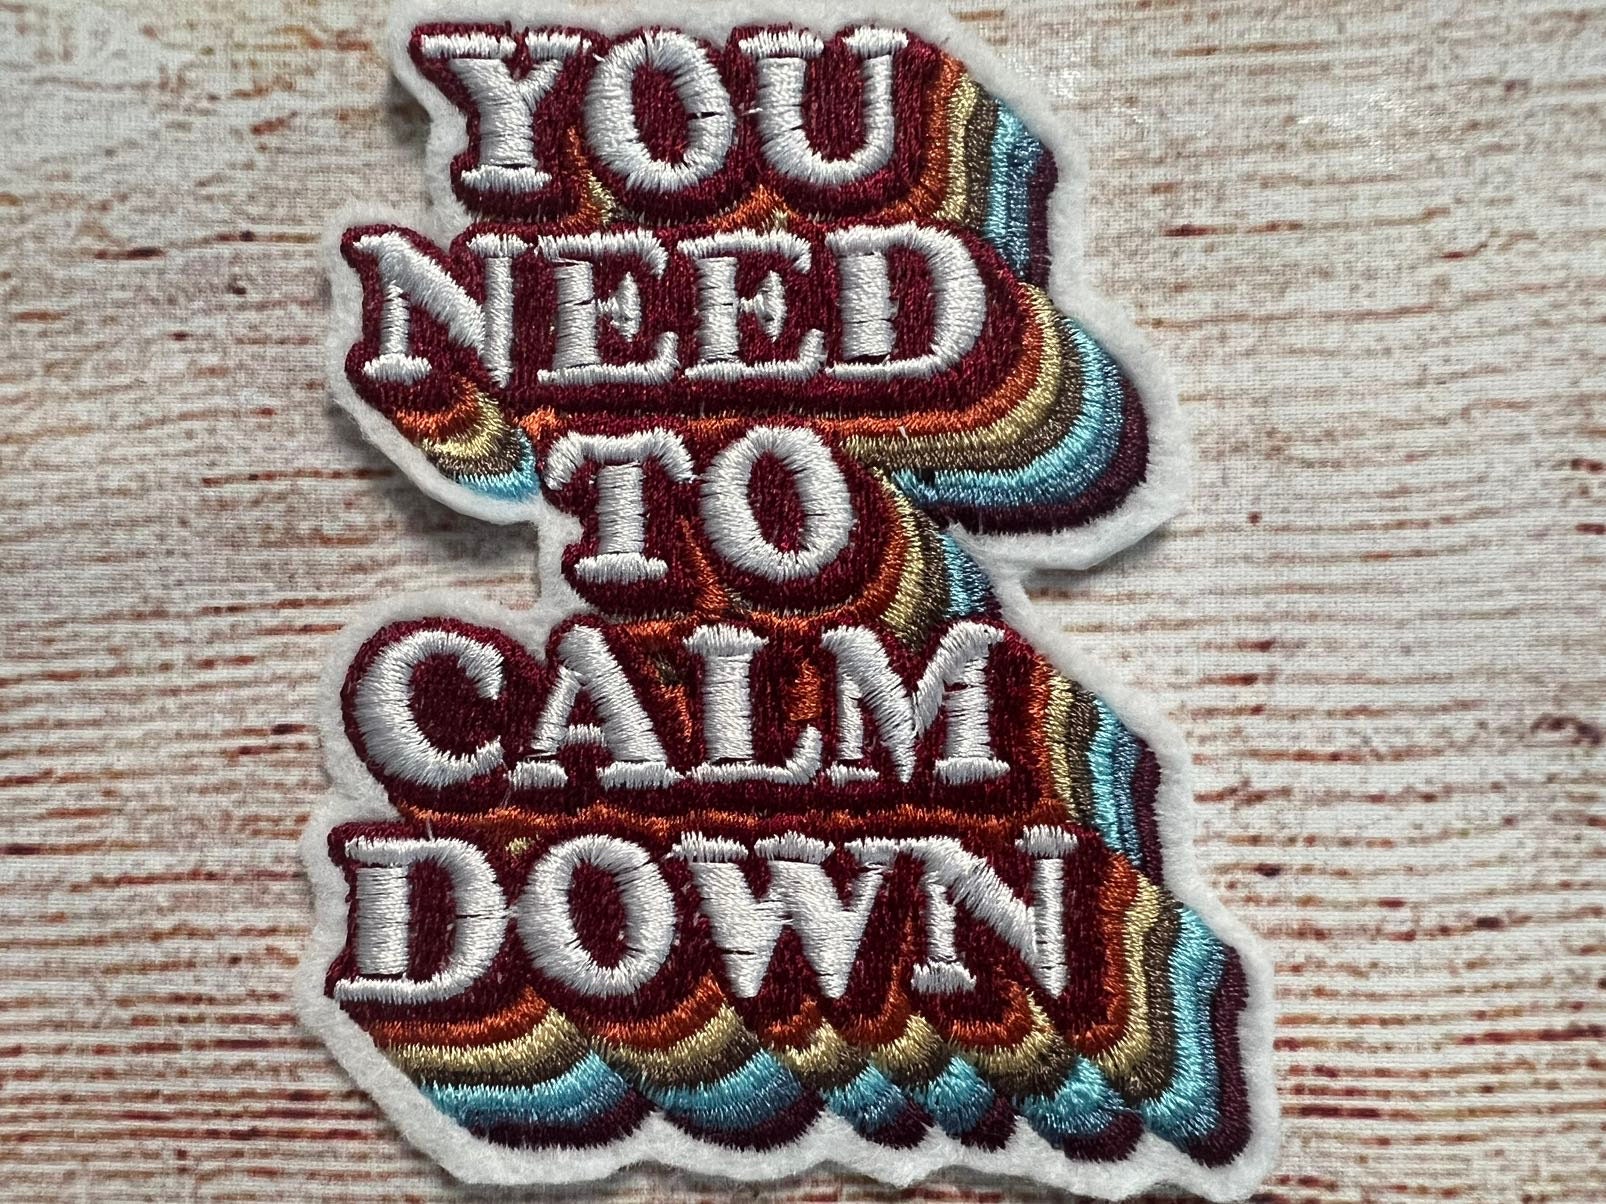 Eras Tour 13 Iron On Patch - 2.5 Inch - Taylor Swift Inspired